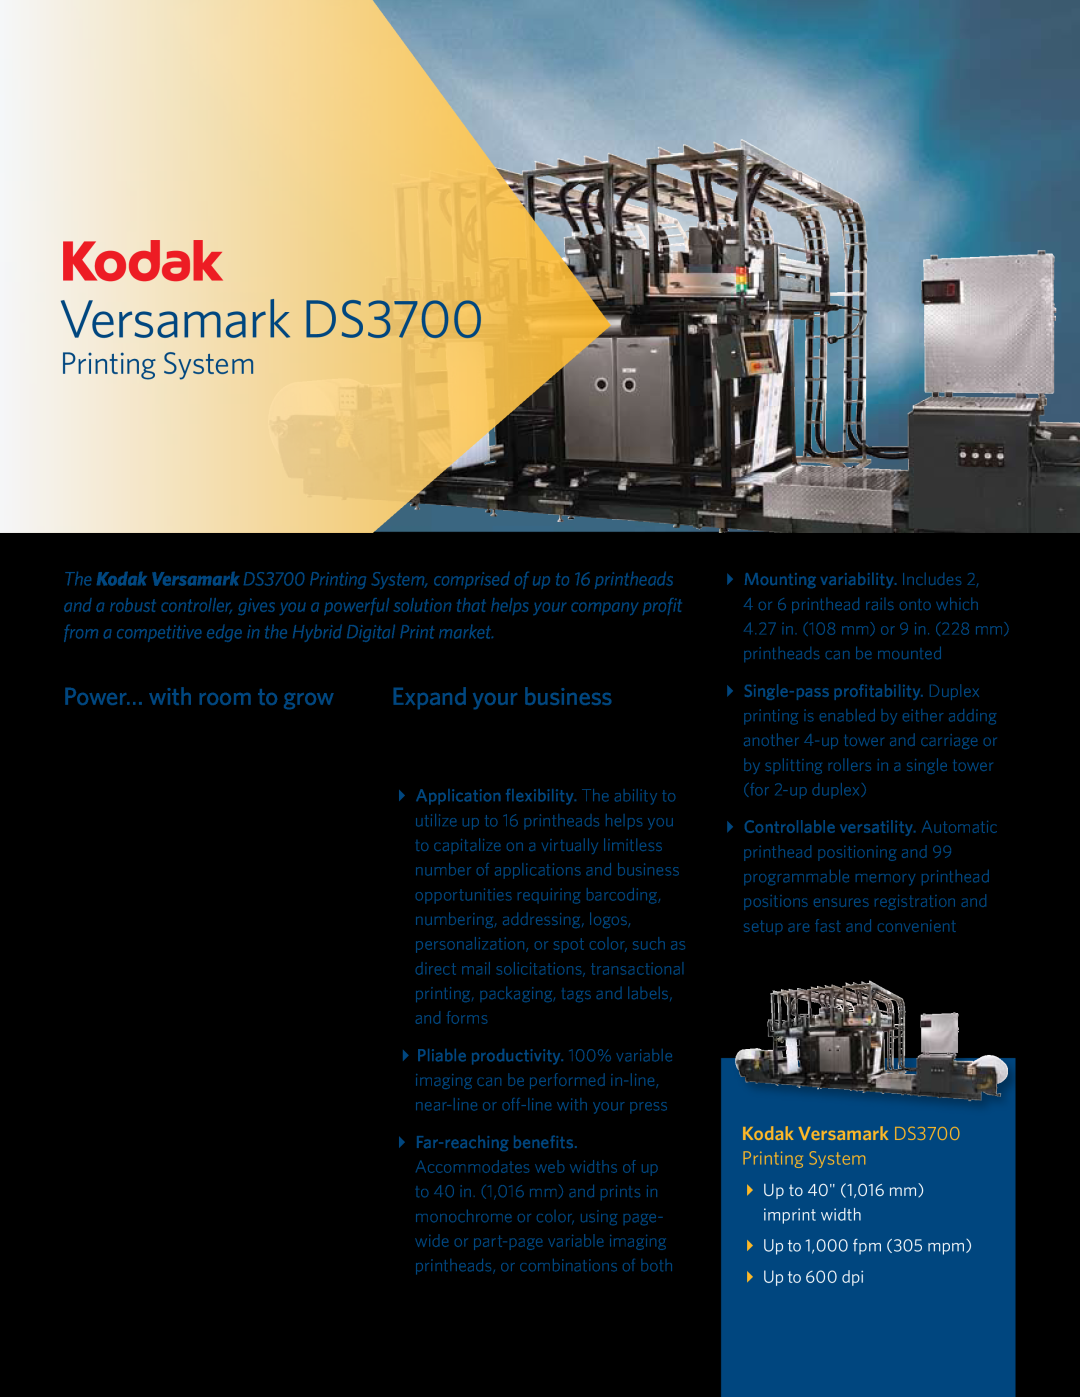 Kodak manual Printing System, Power… with room to grow, Expand your business, Kodak Versamark DS3700, Up to 600 dpi 